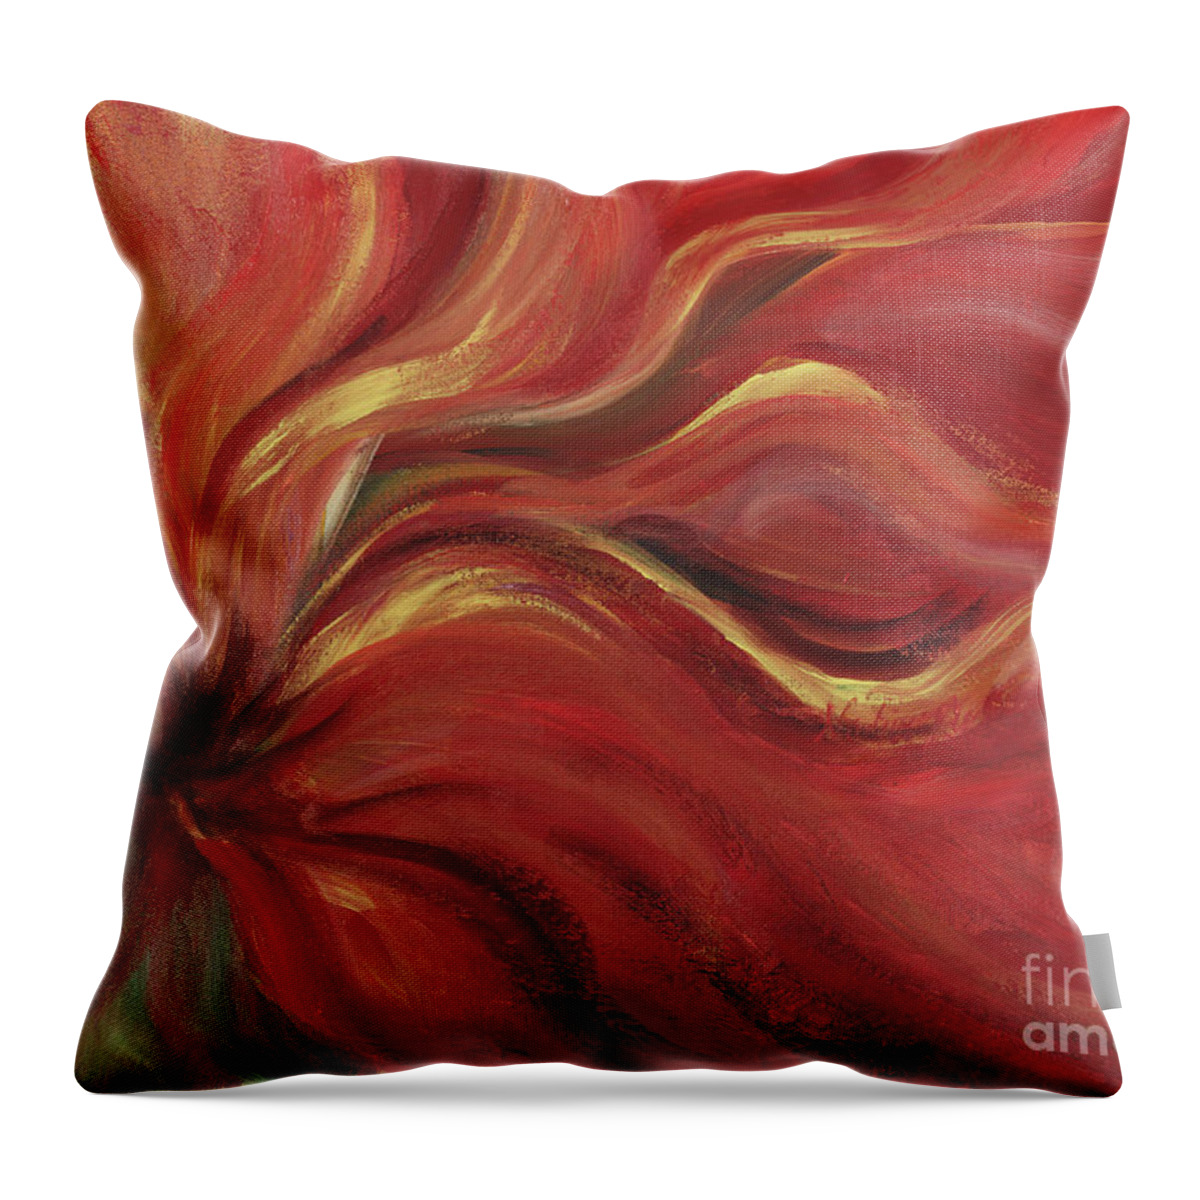 Red Throw Pillow featuring the painting Flaming Flower by Nadine Rippelmeyer